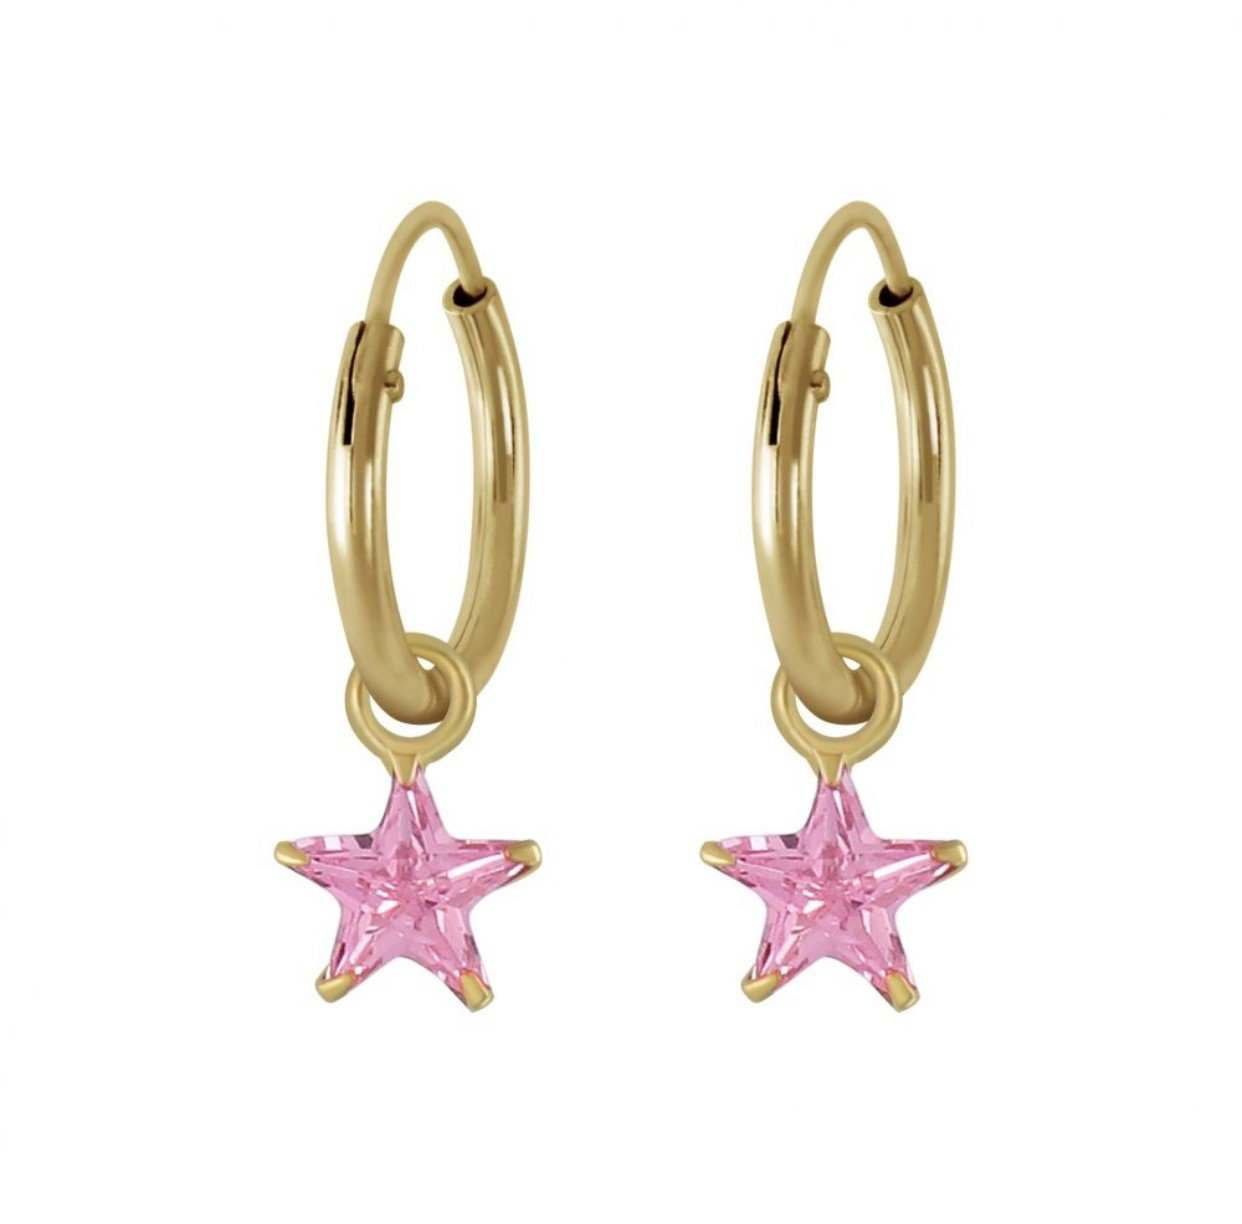 14K Gold Plated 925 Sterling Silver Star 4 mm CZ Hoop Earrings For Kids, Teens - Forever Kids Jewelry